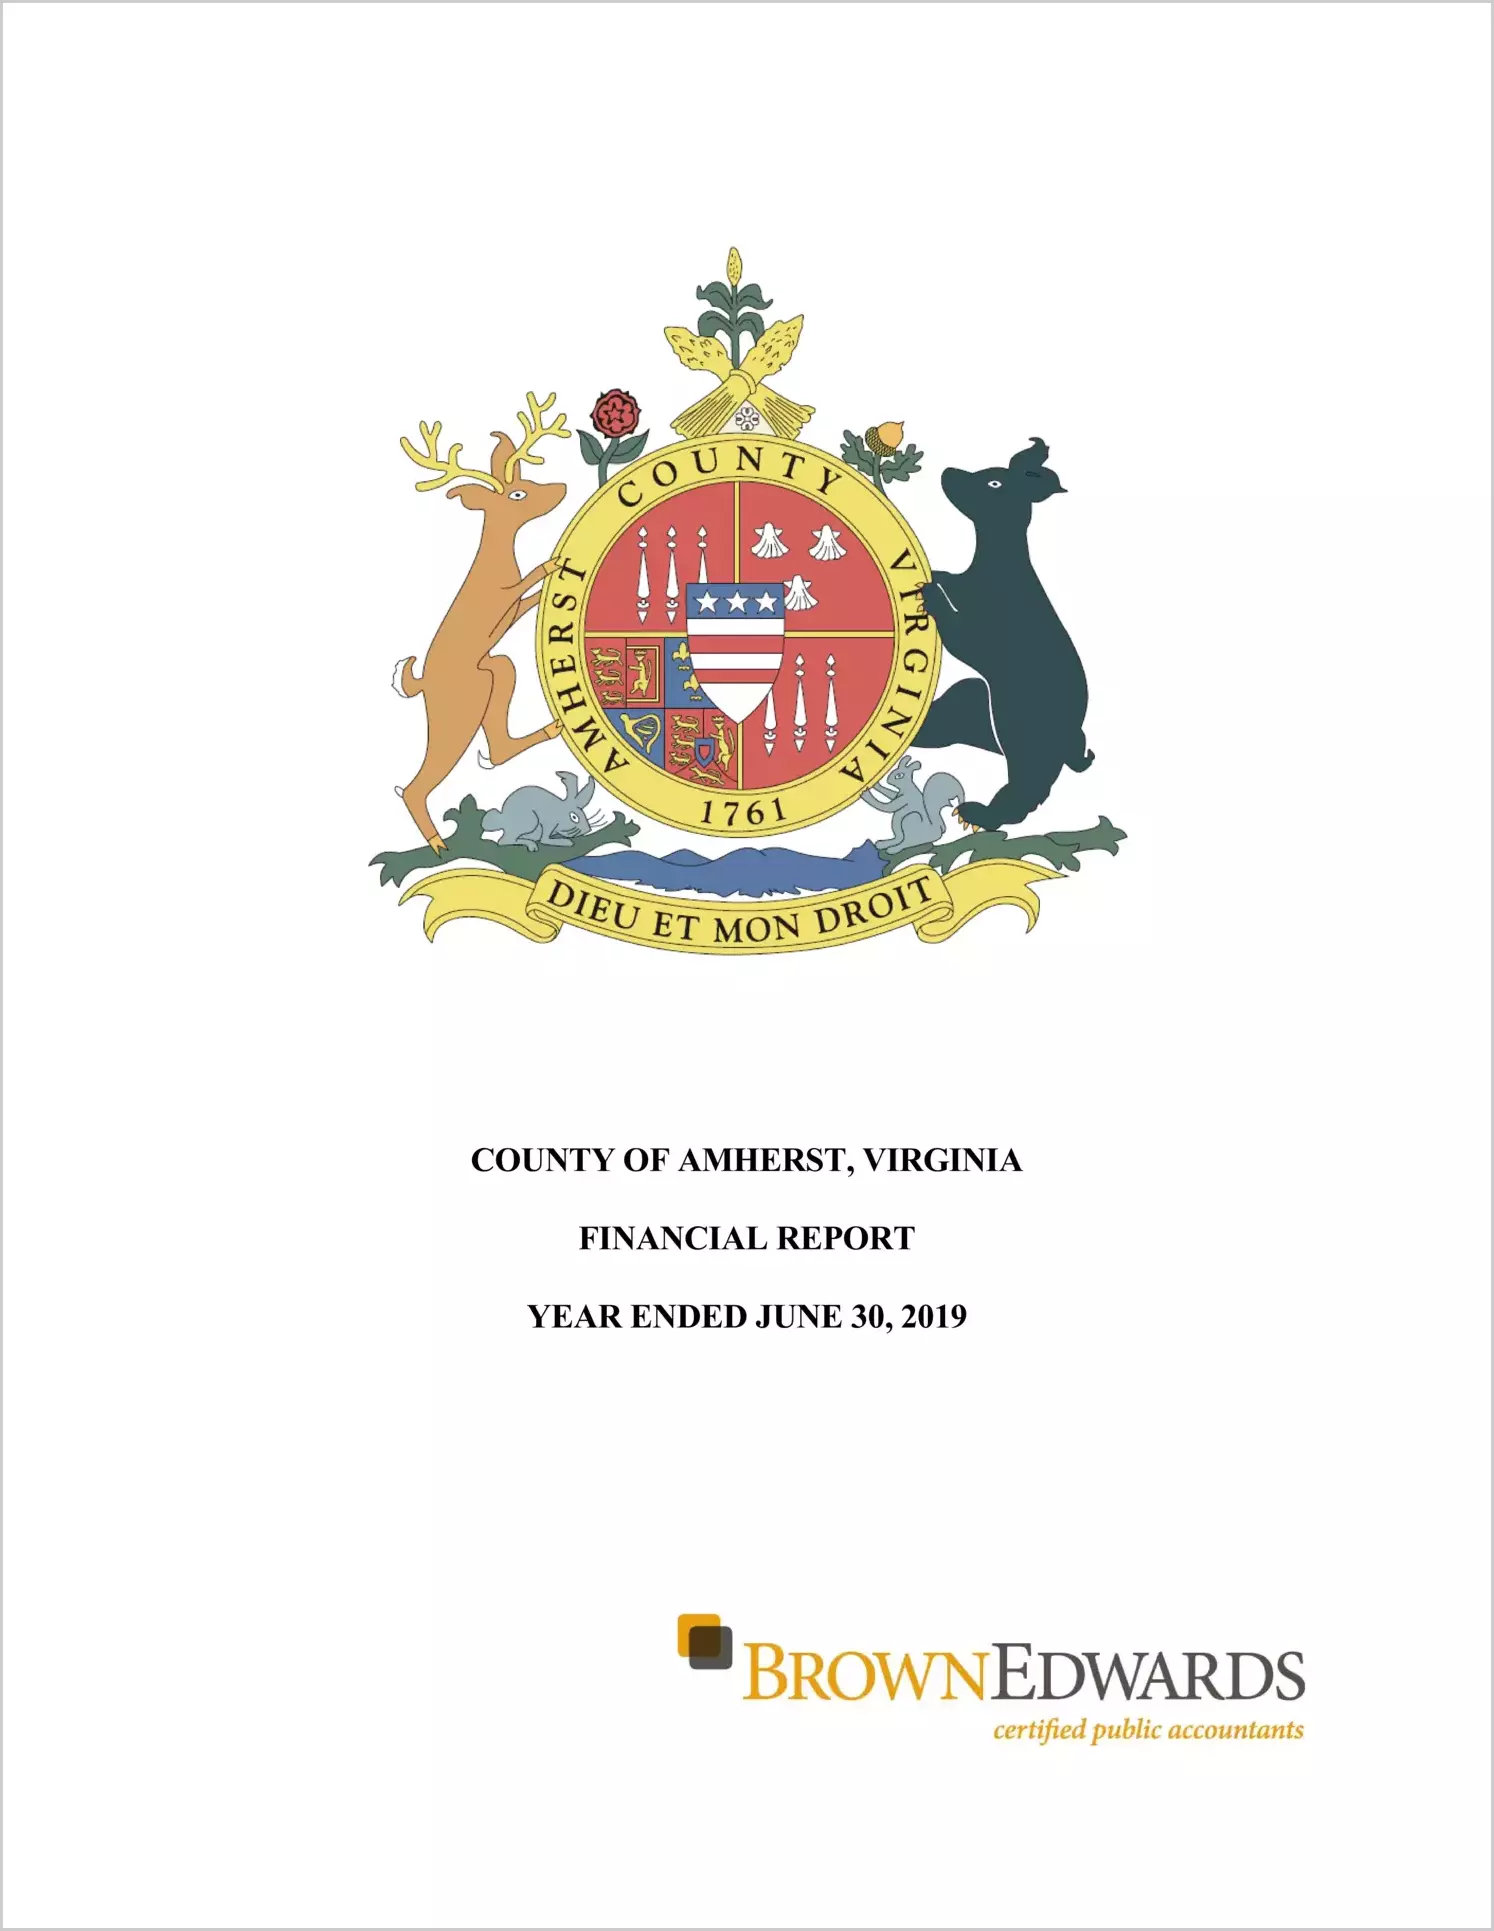 2019 Annual Financial Report for County of Amherst